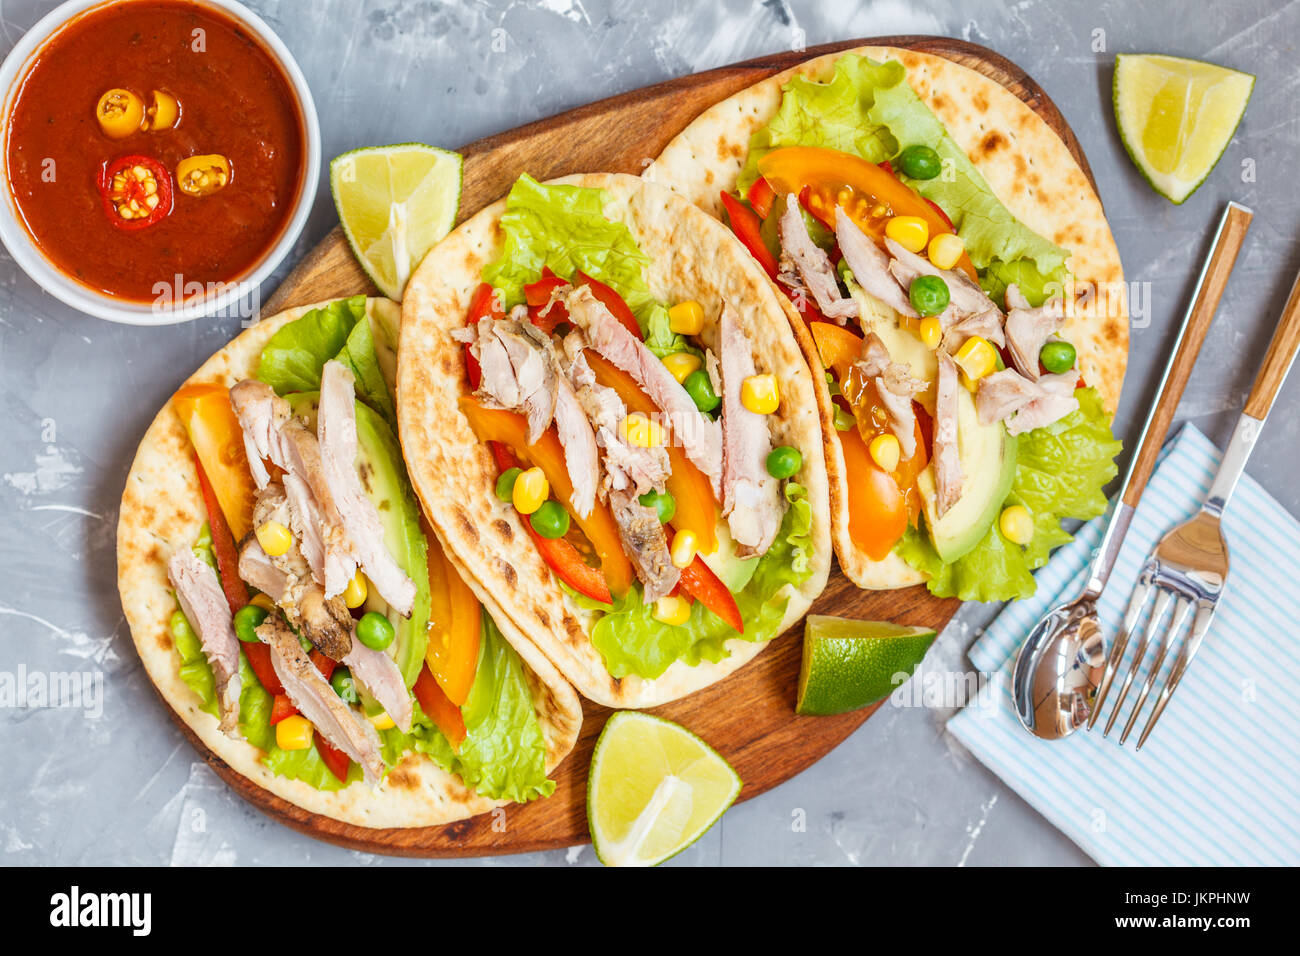 Fajitas with chicken, vegetables and spicy sauce salsa. Stock Photo